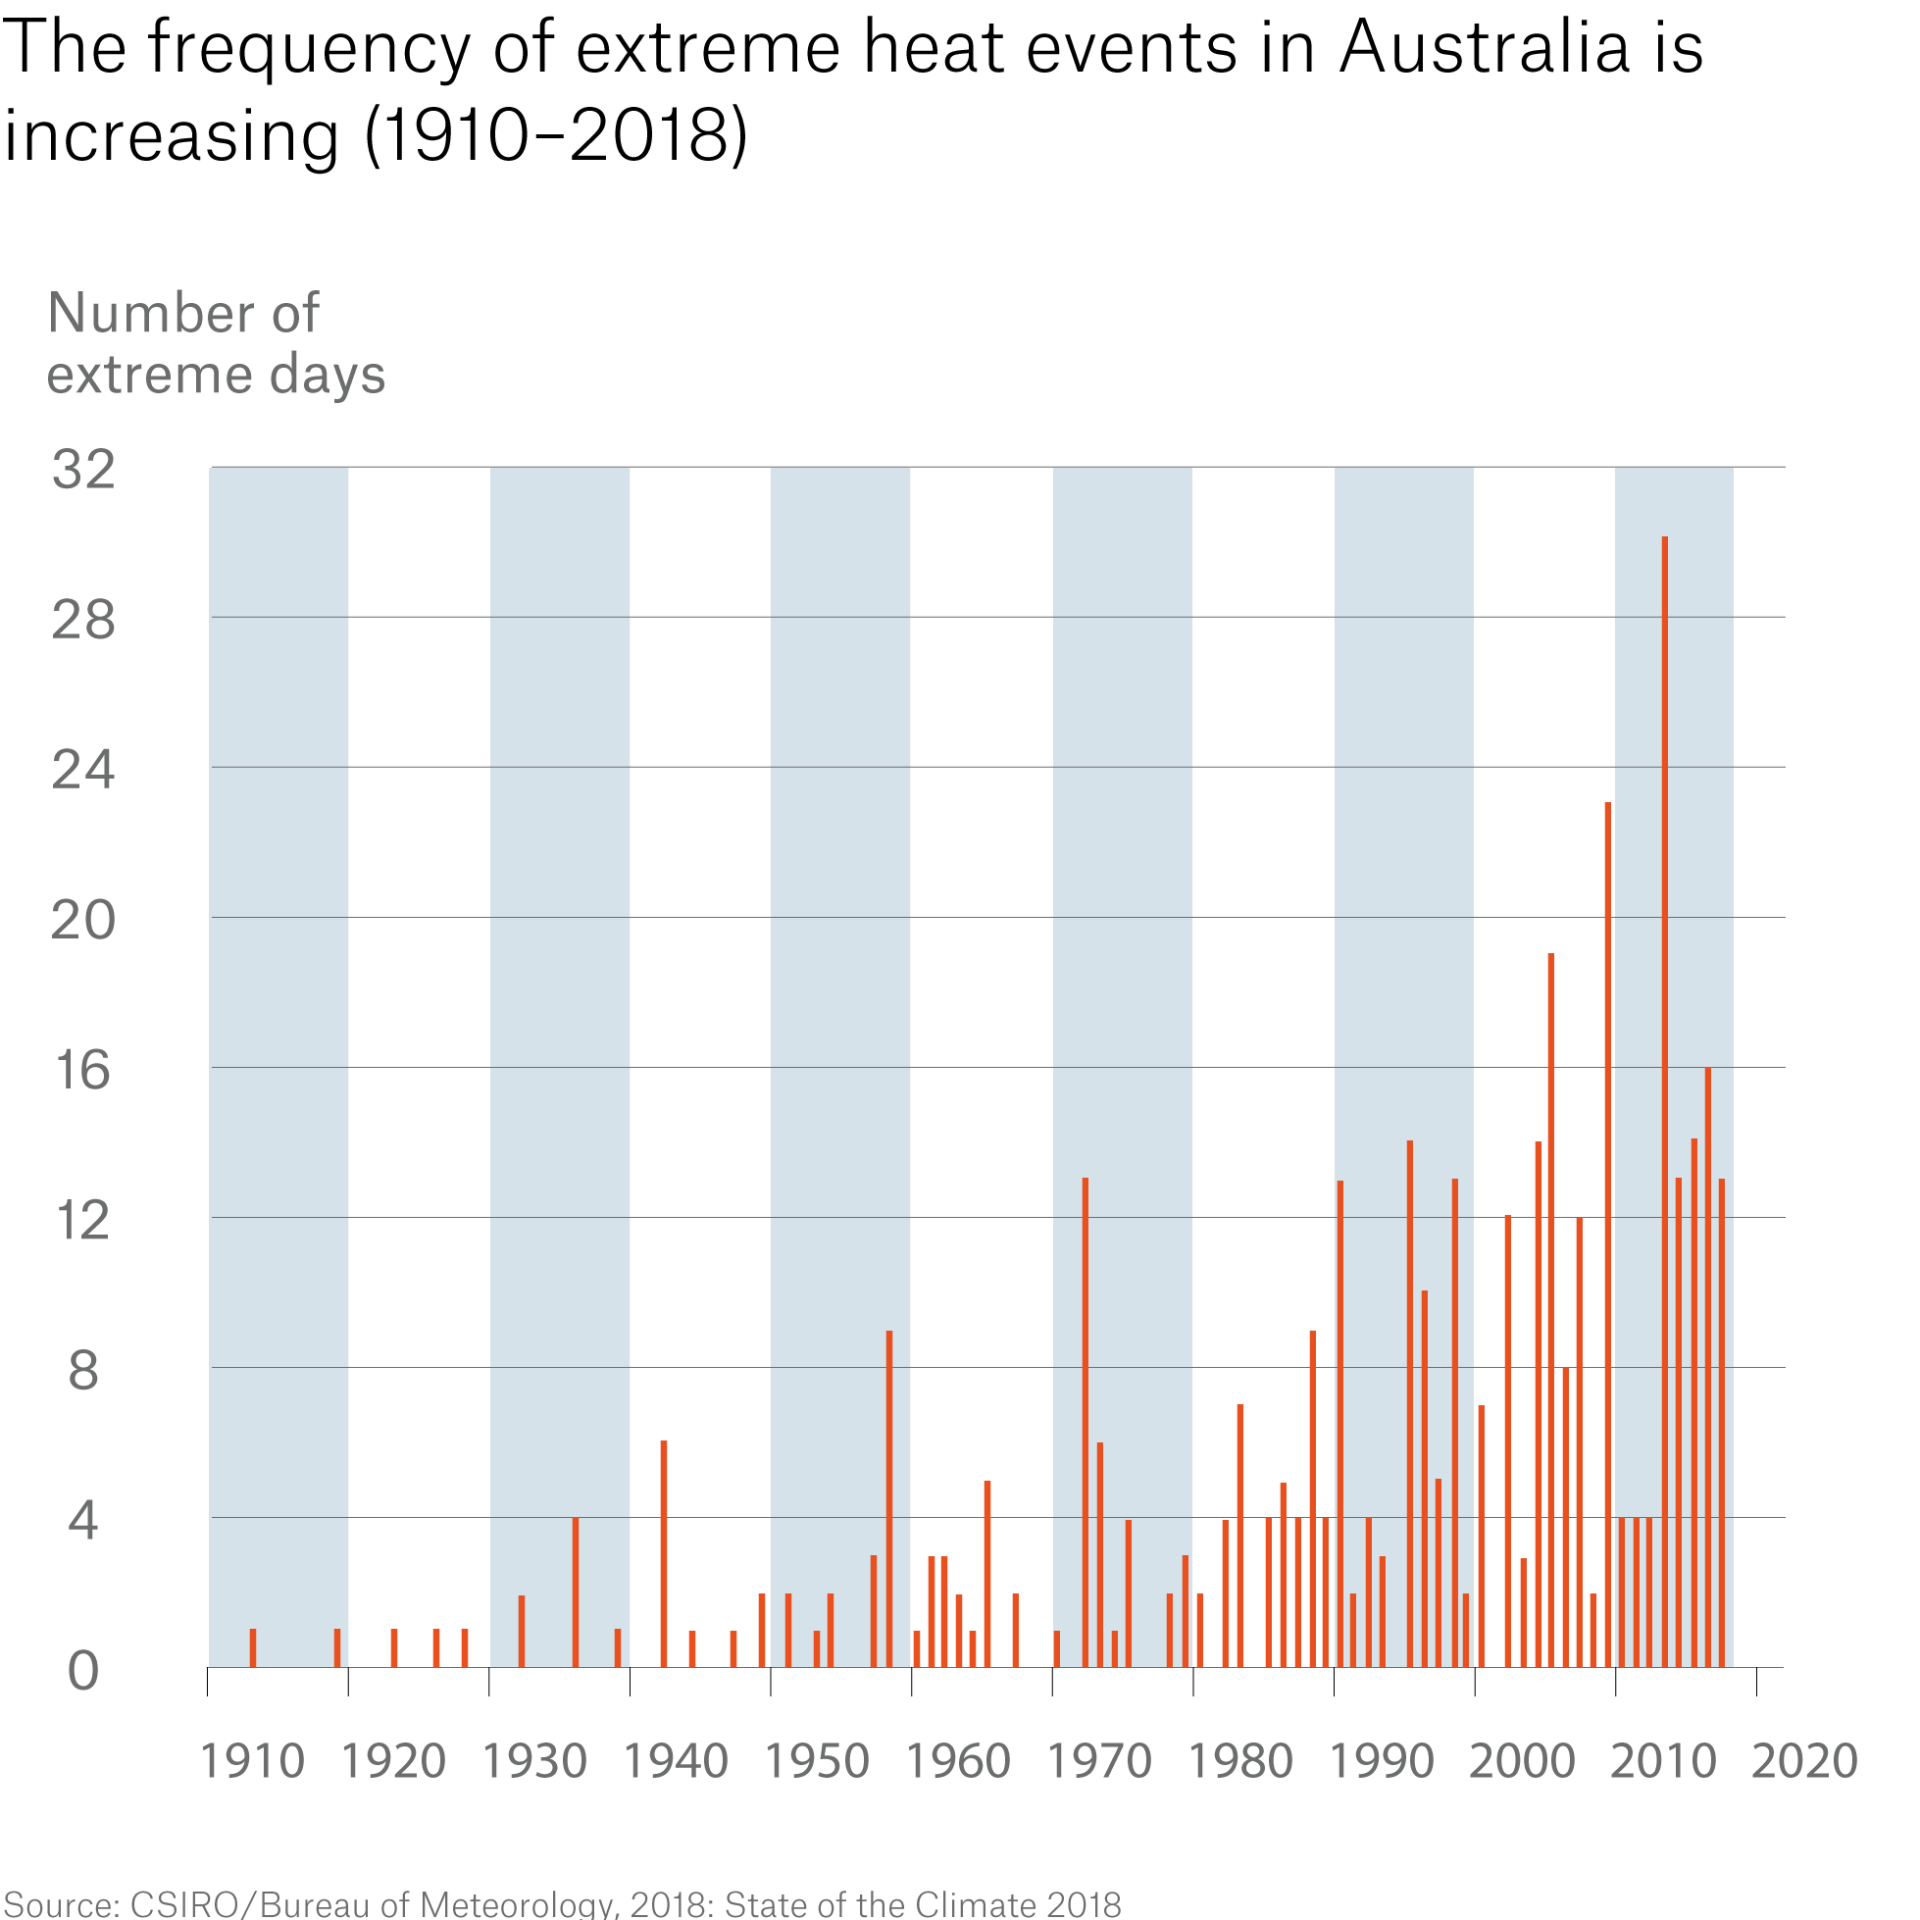 Number of extremely hot days in Australia on the rise